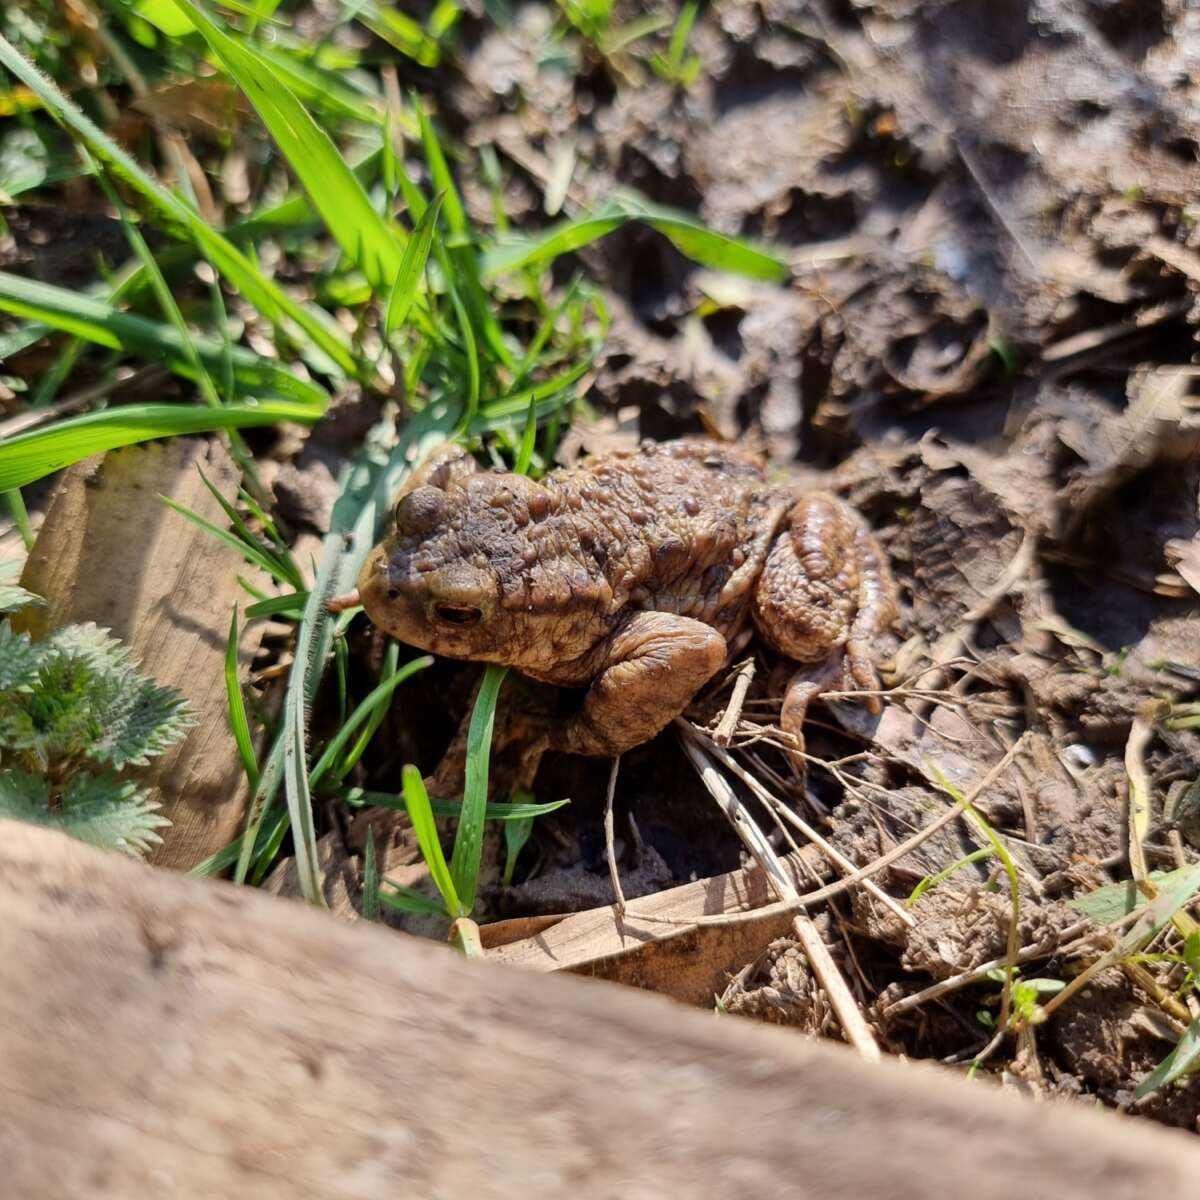 Toad in the wildlife pond